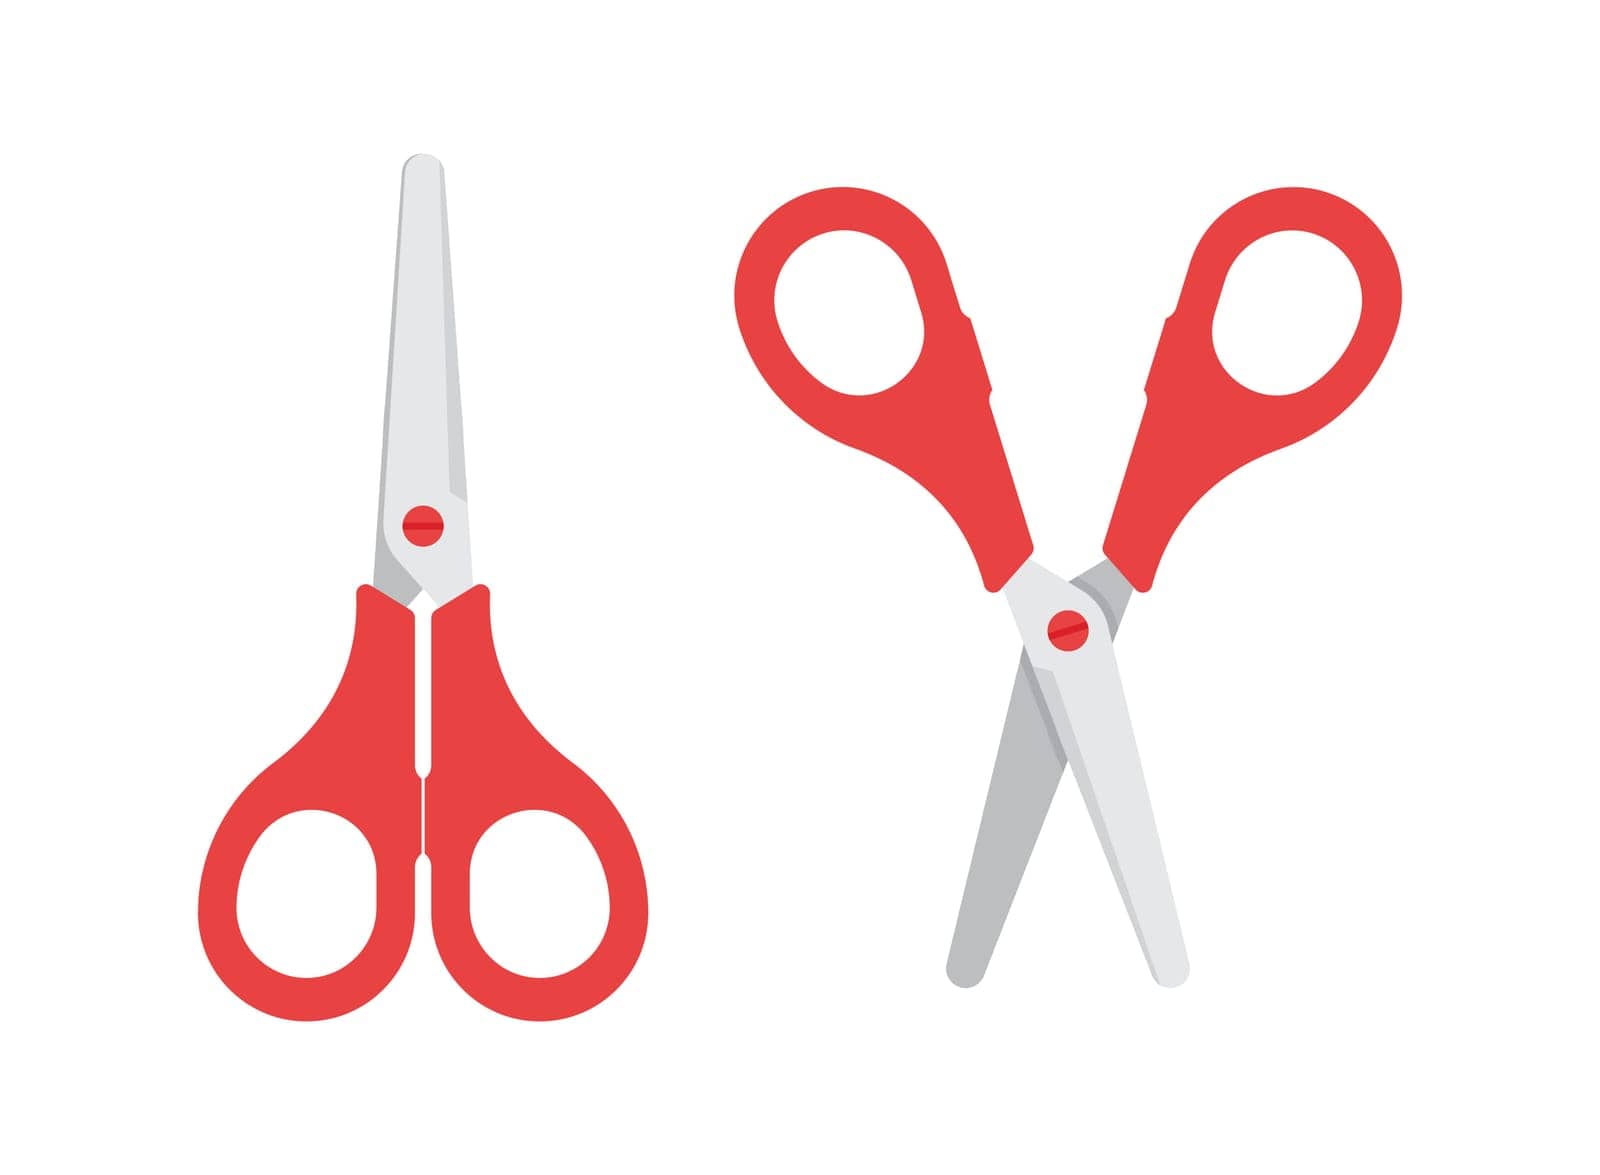 Scissor icon in flat style. Cutting hair equipment vector illustration on isolated background. Hairdressing sign business concept. by LysenkoA